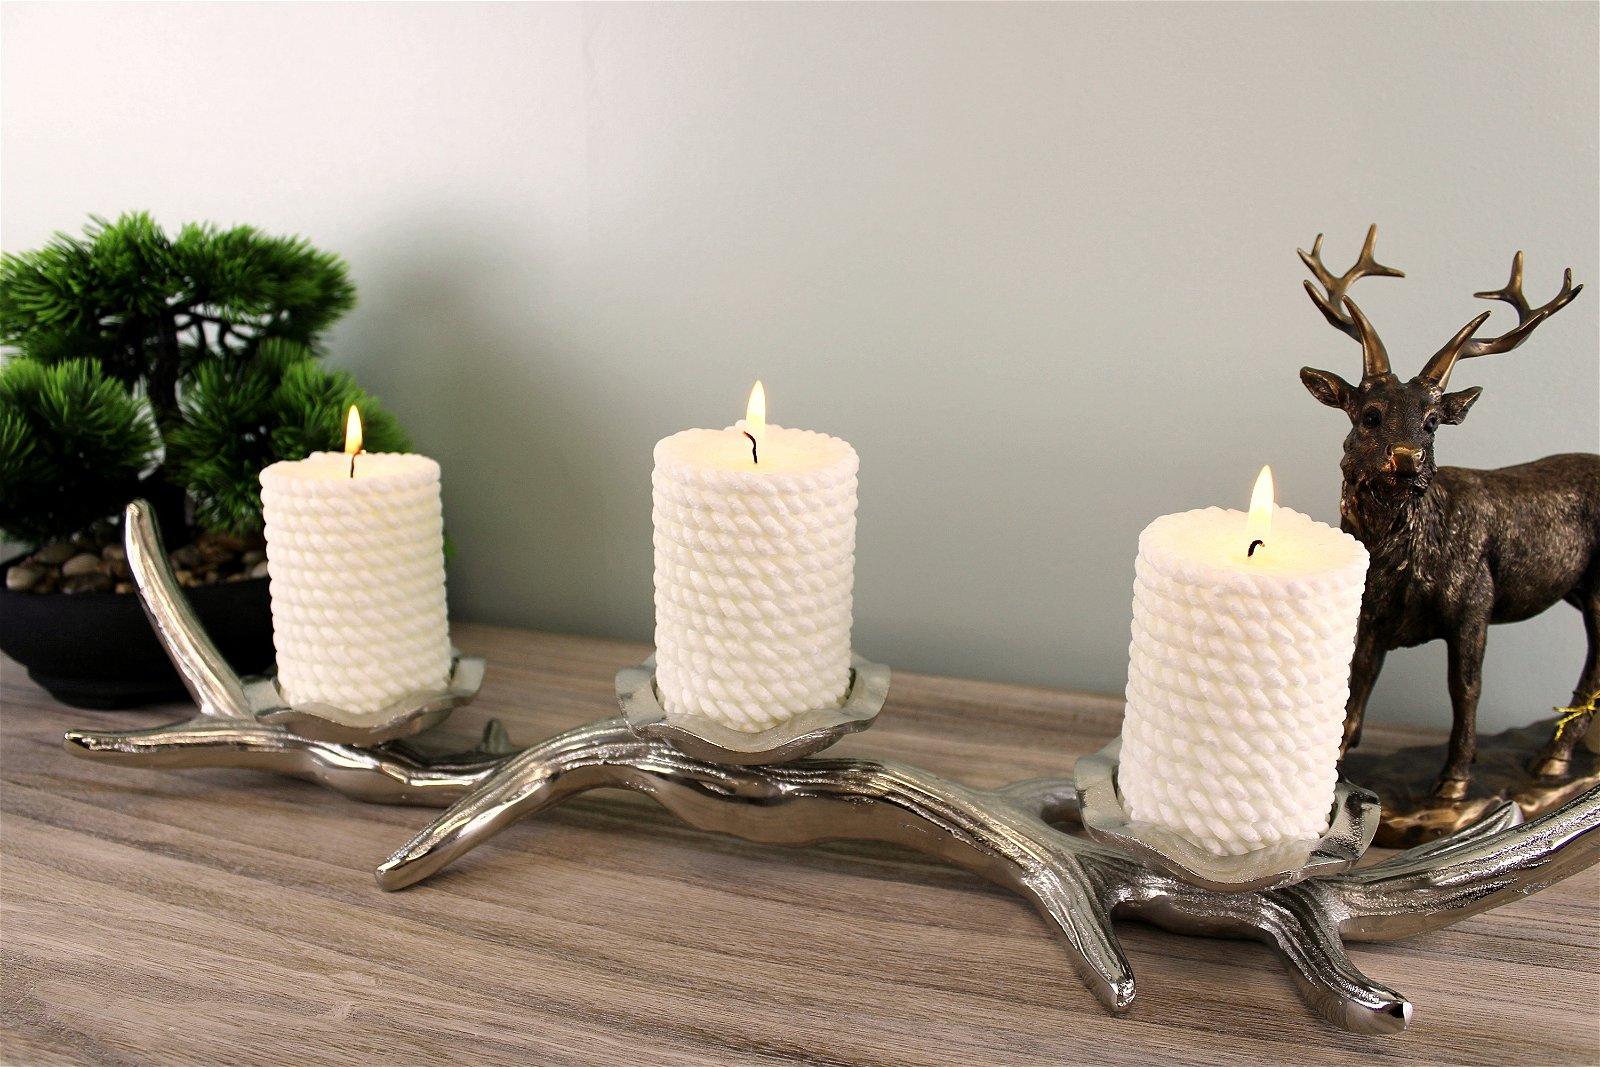 View 3 Piece Silver Metal Antler Candle Holder information